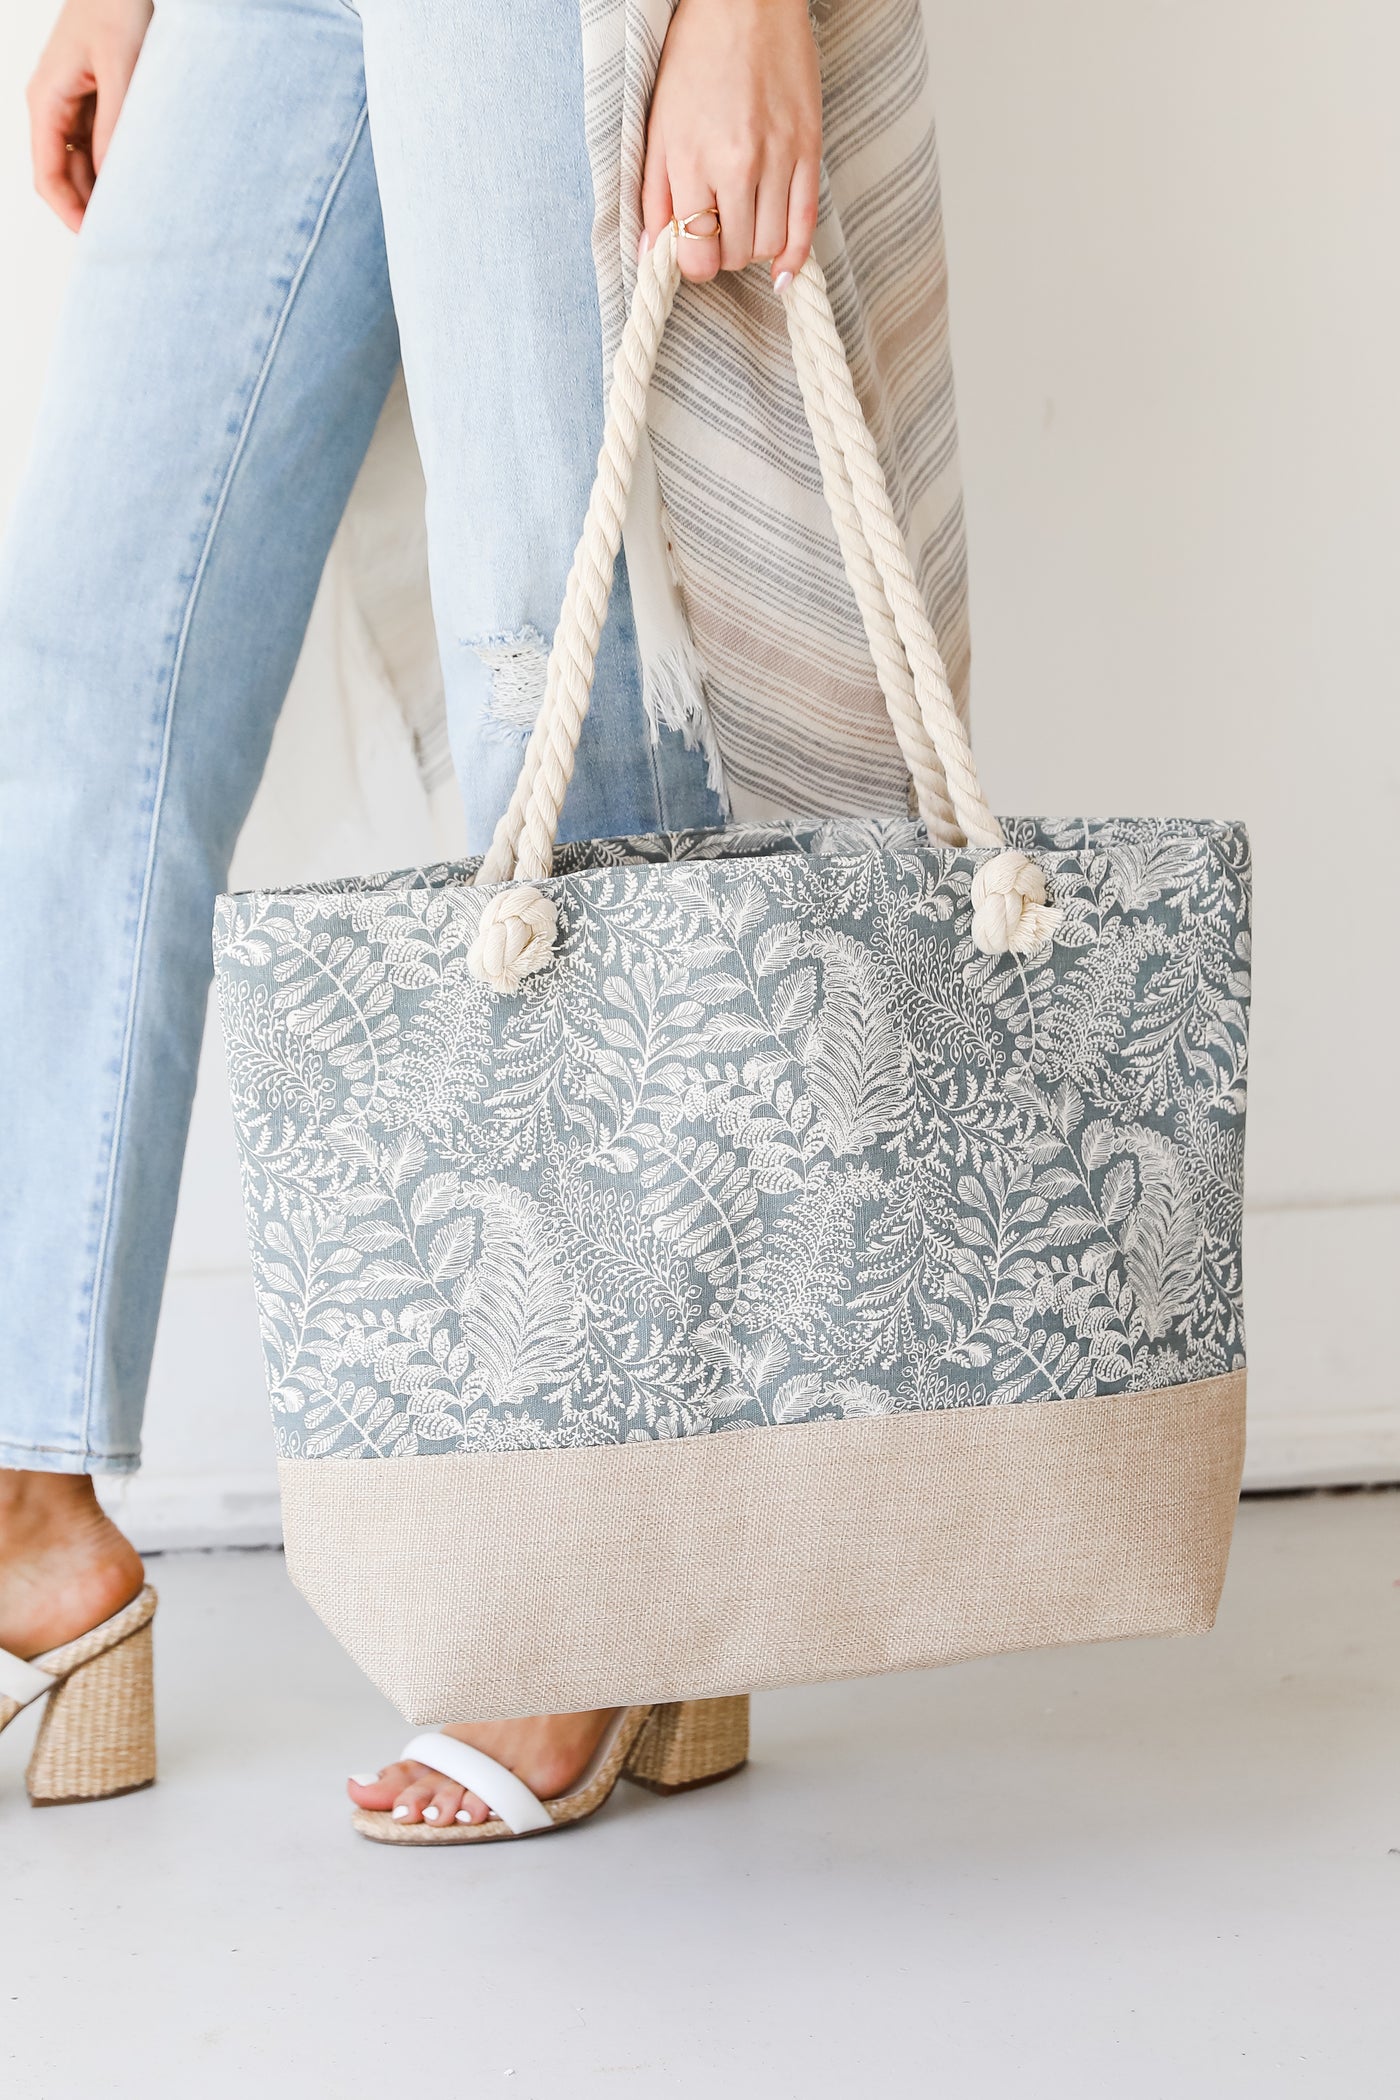 model holding a Grey Tote Bag